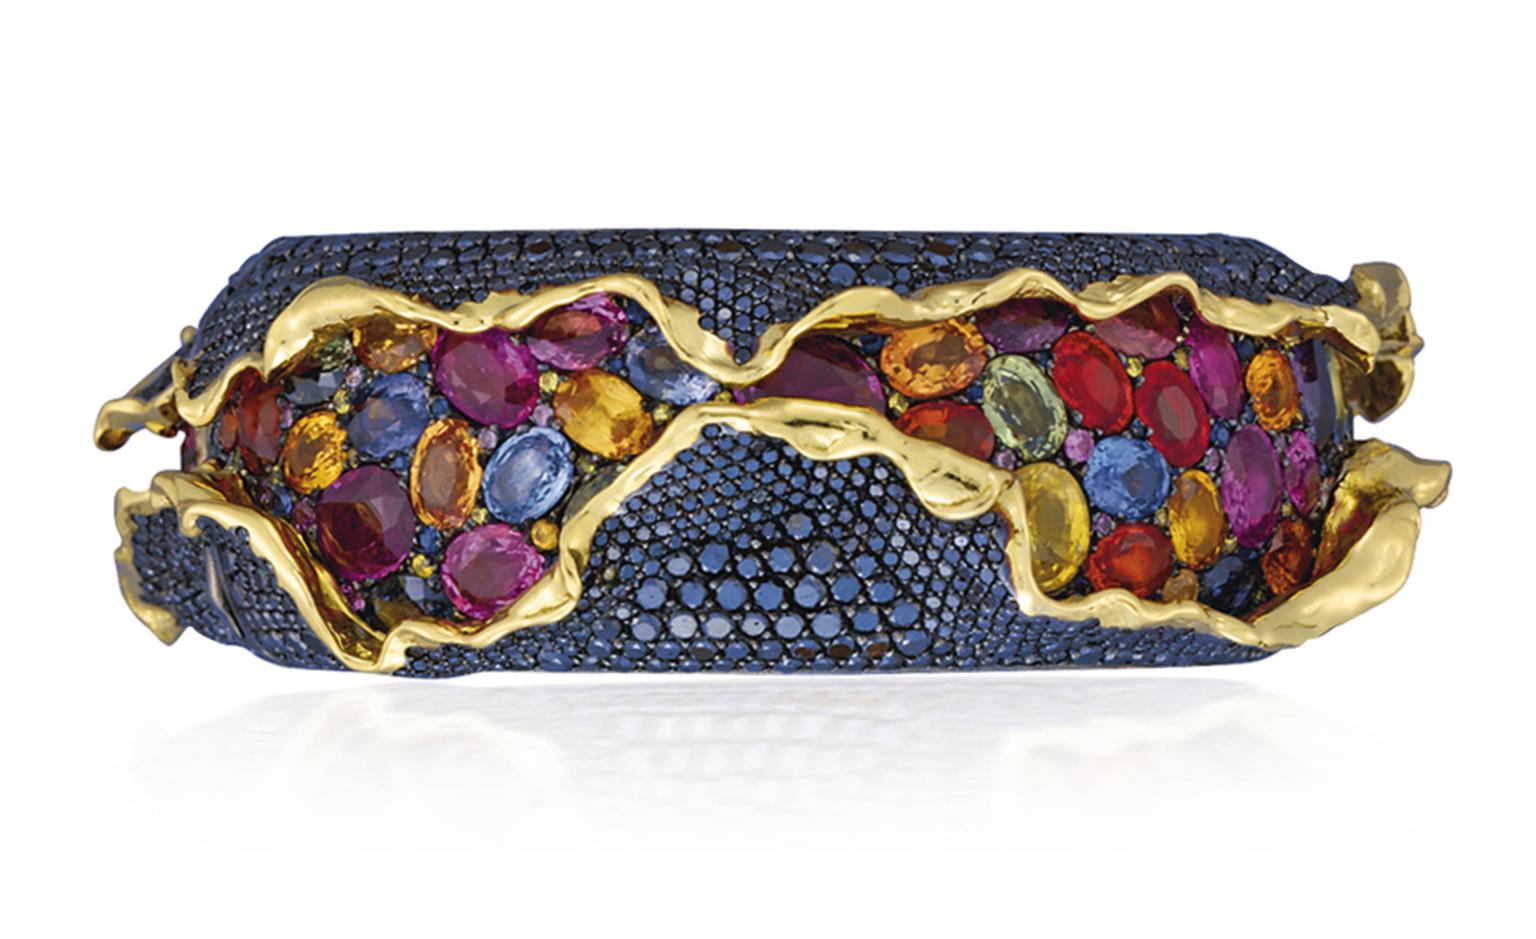 Lot 93 (2). An unusual suite of coloured diamond and coloured sapphire 'Craquele' jewellery, by Andre Marcha. Comprising a hinged bangle, ear clips and a ring. Estimate 50,000 - 60,000 U.S. dollars.